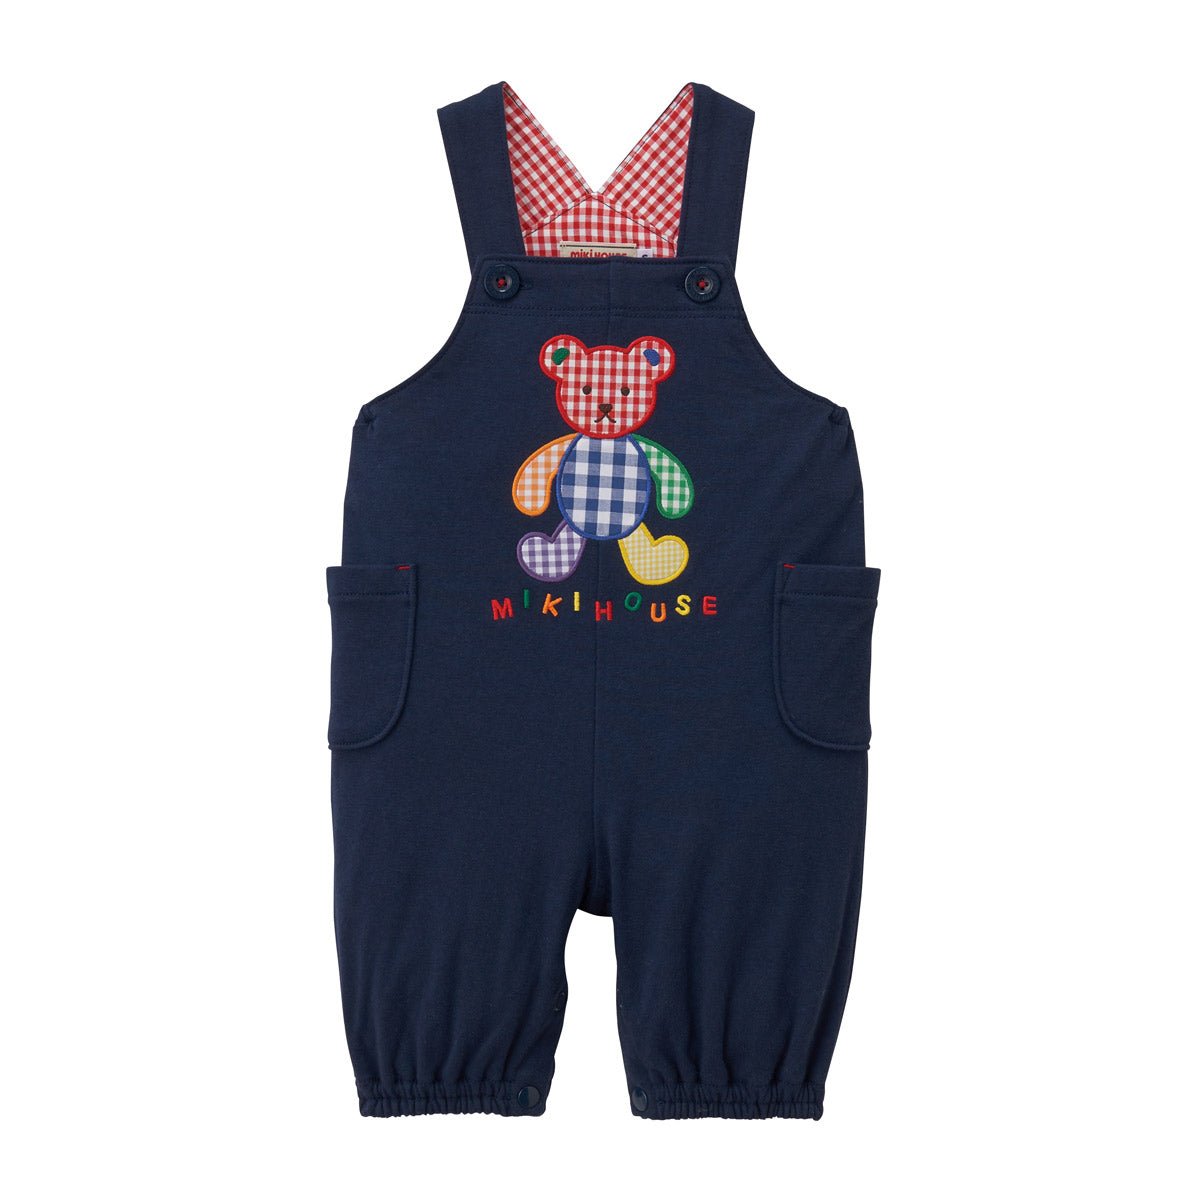 Gingham Teddy Overalls - 10-3332-828-03-S